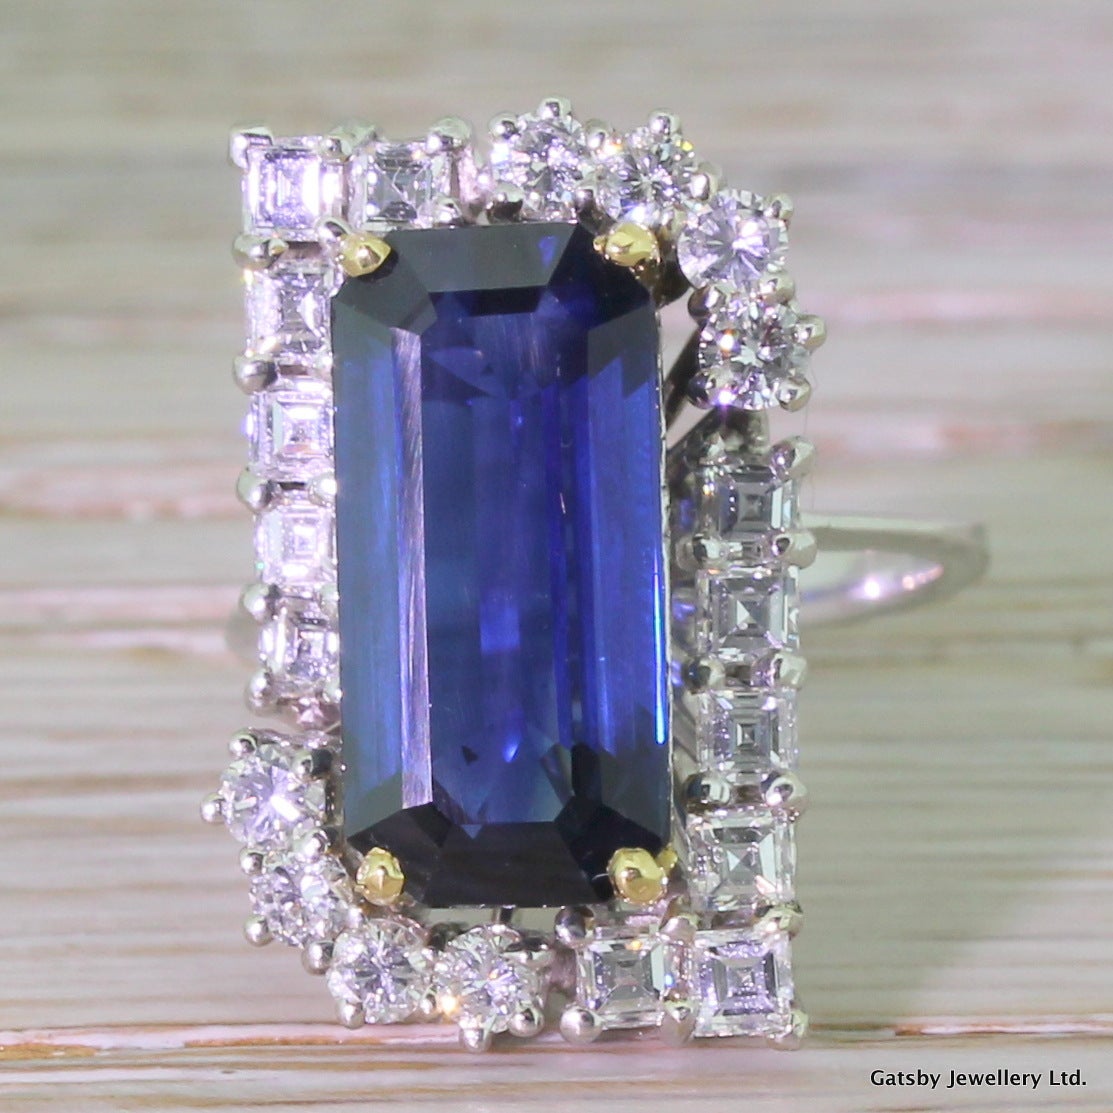 An astonishing sapphire - natural and with no enhancements - set in a quite astonishing ring. The 5.96 carat sapphire is a perfect glowing cornflower blue. Eight brilliant round cut diamonds and twelve square cuts surround the sapphire. The square